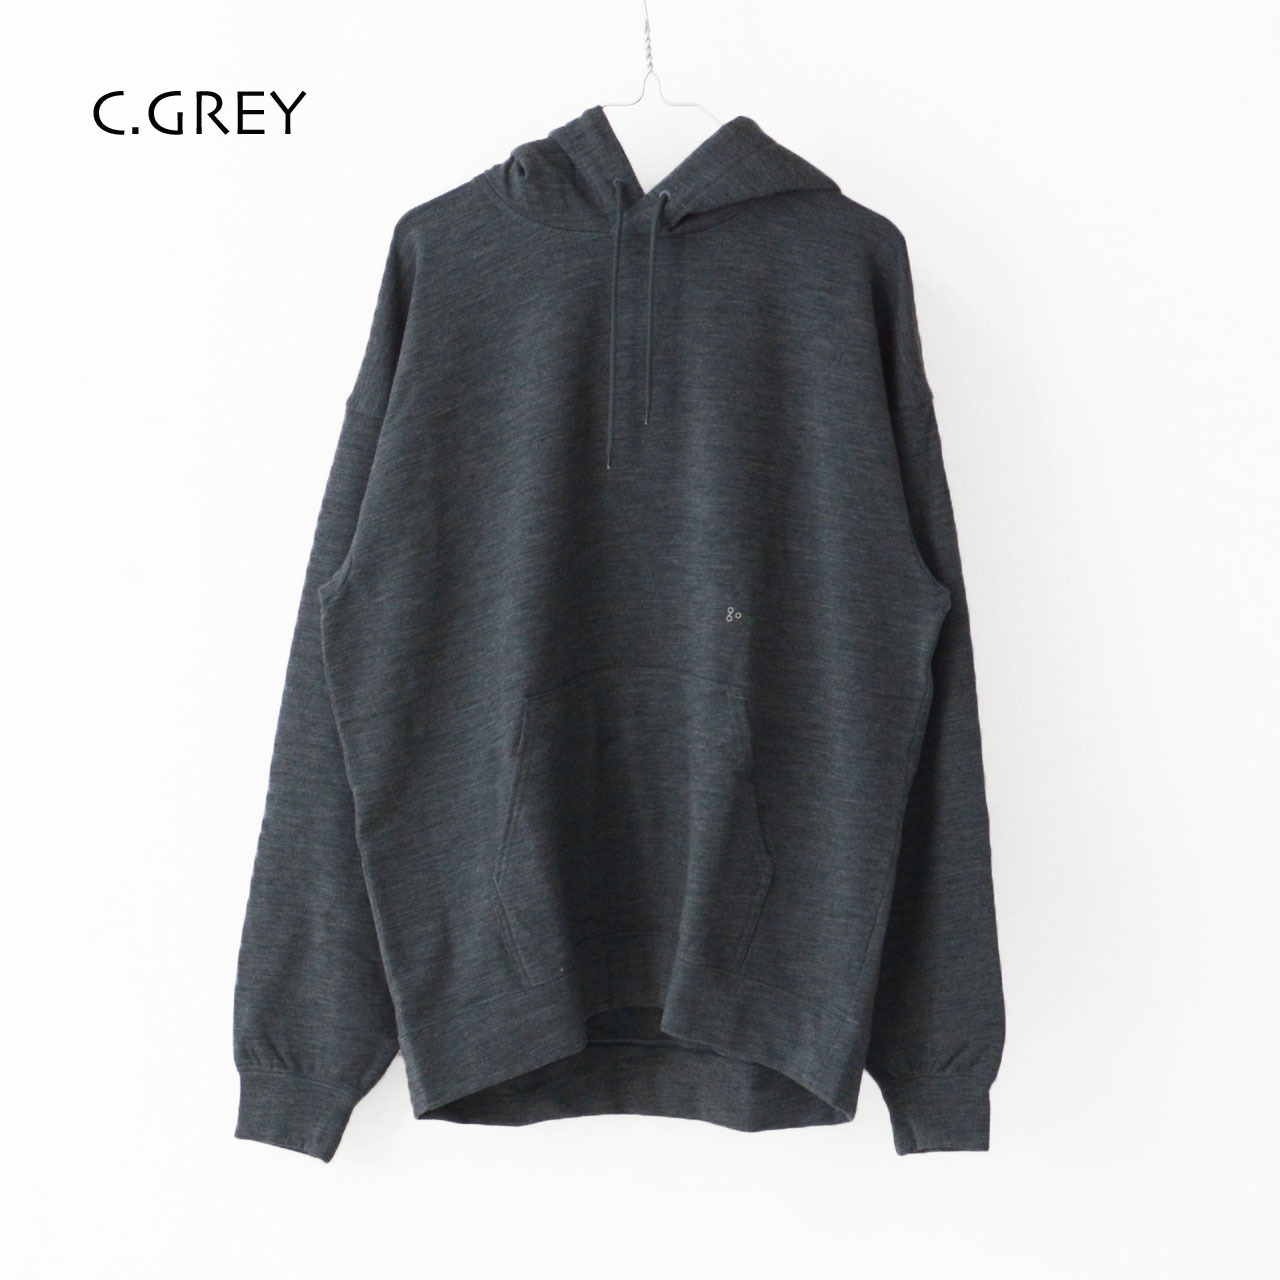 Gymphlex [ジムフレックス] WOOL STRETCH INLEY PULLOVER PARKER [GY-C0022 WIS]_f0051306_14010477.jpg